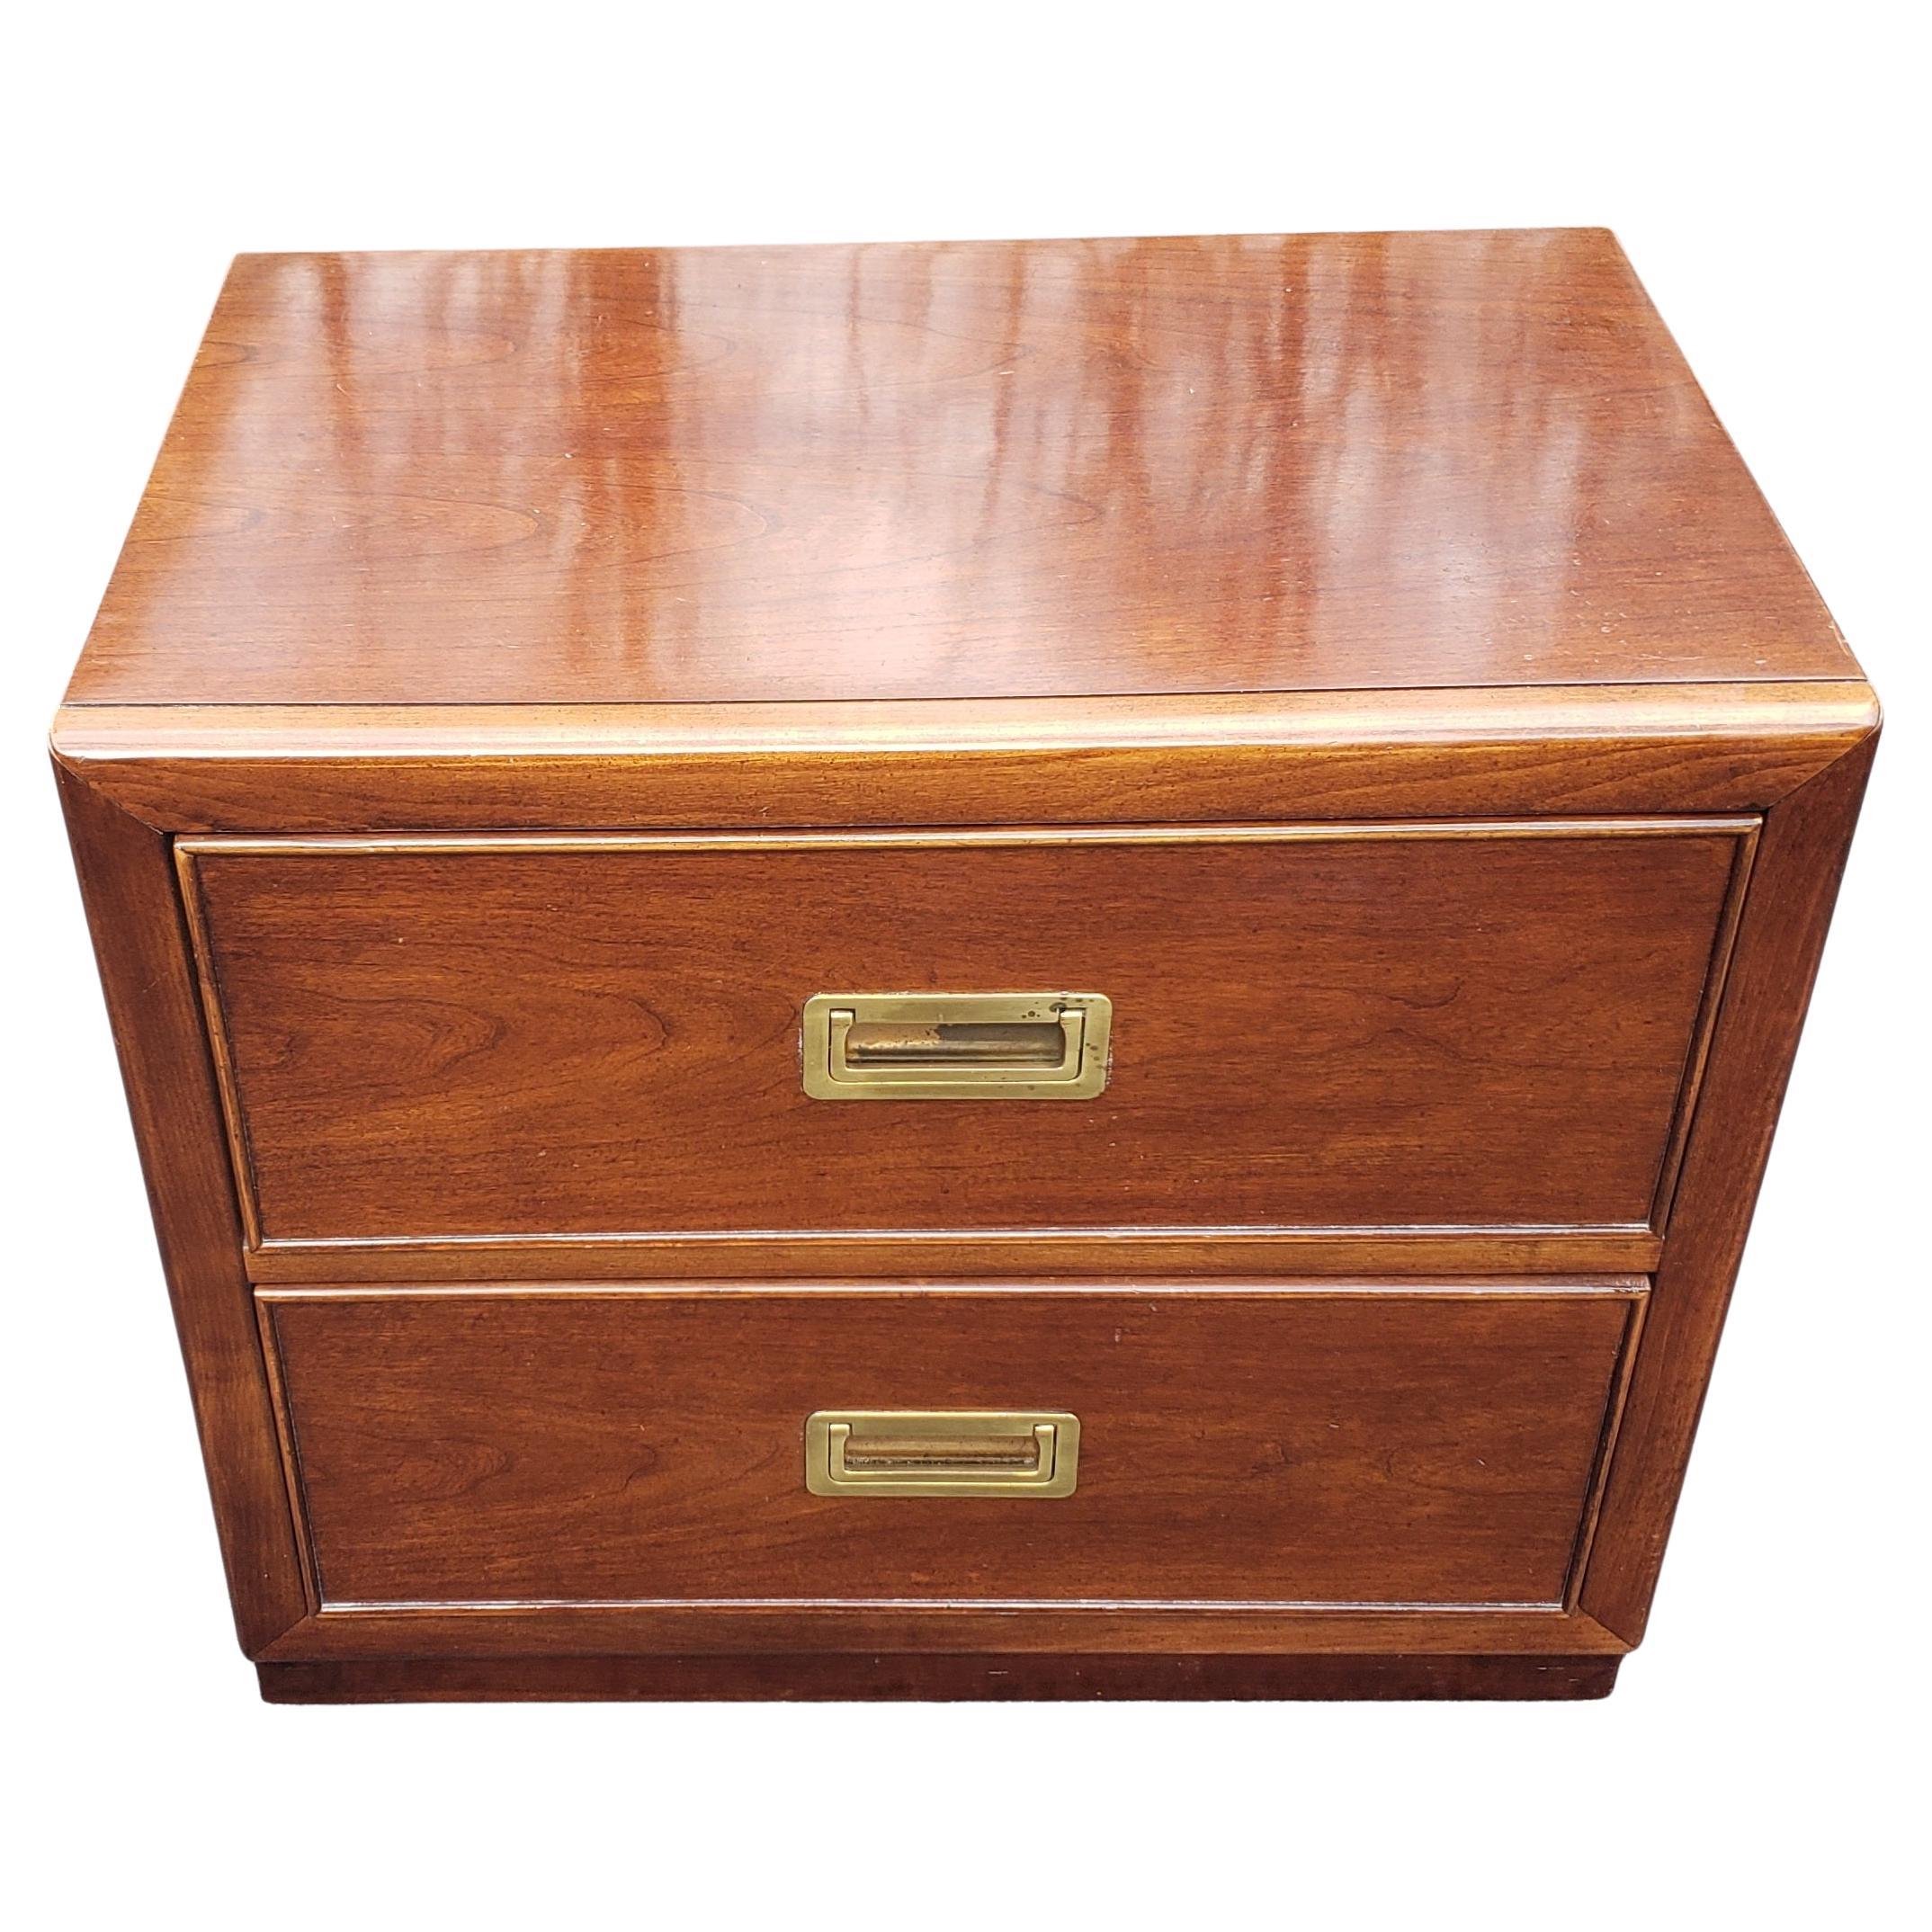 Bernhardt Furniture Cherry Campaign style nightstand in very good vintage condition.
Measures 24